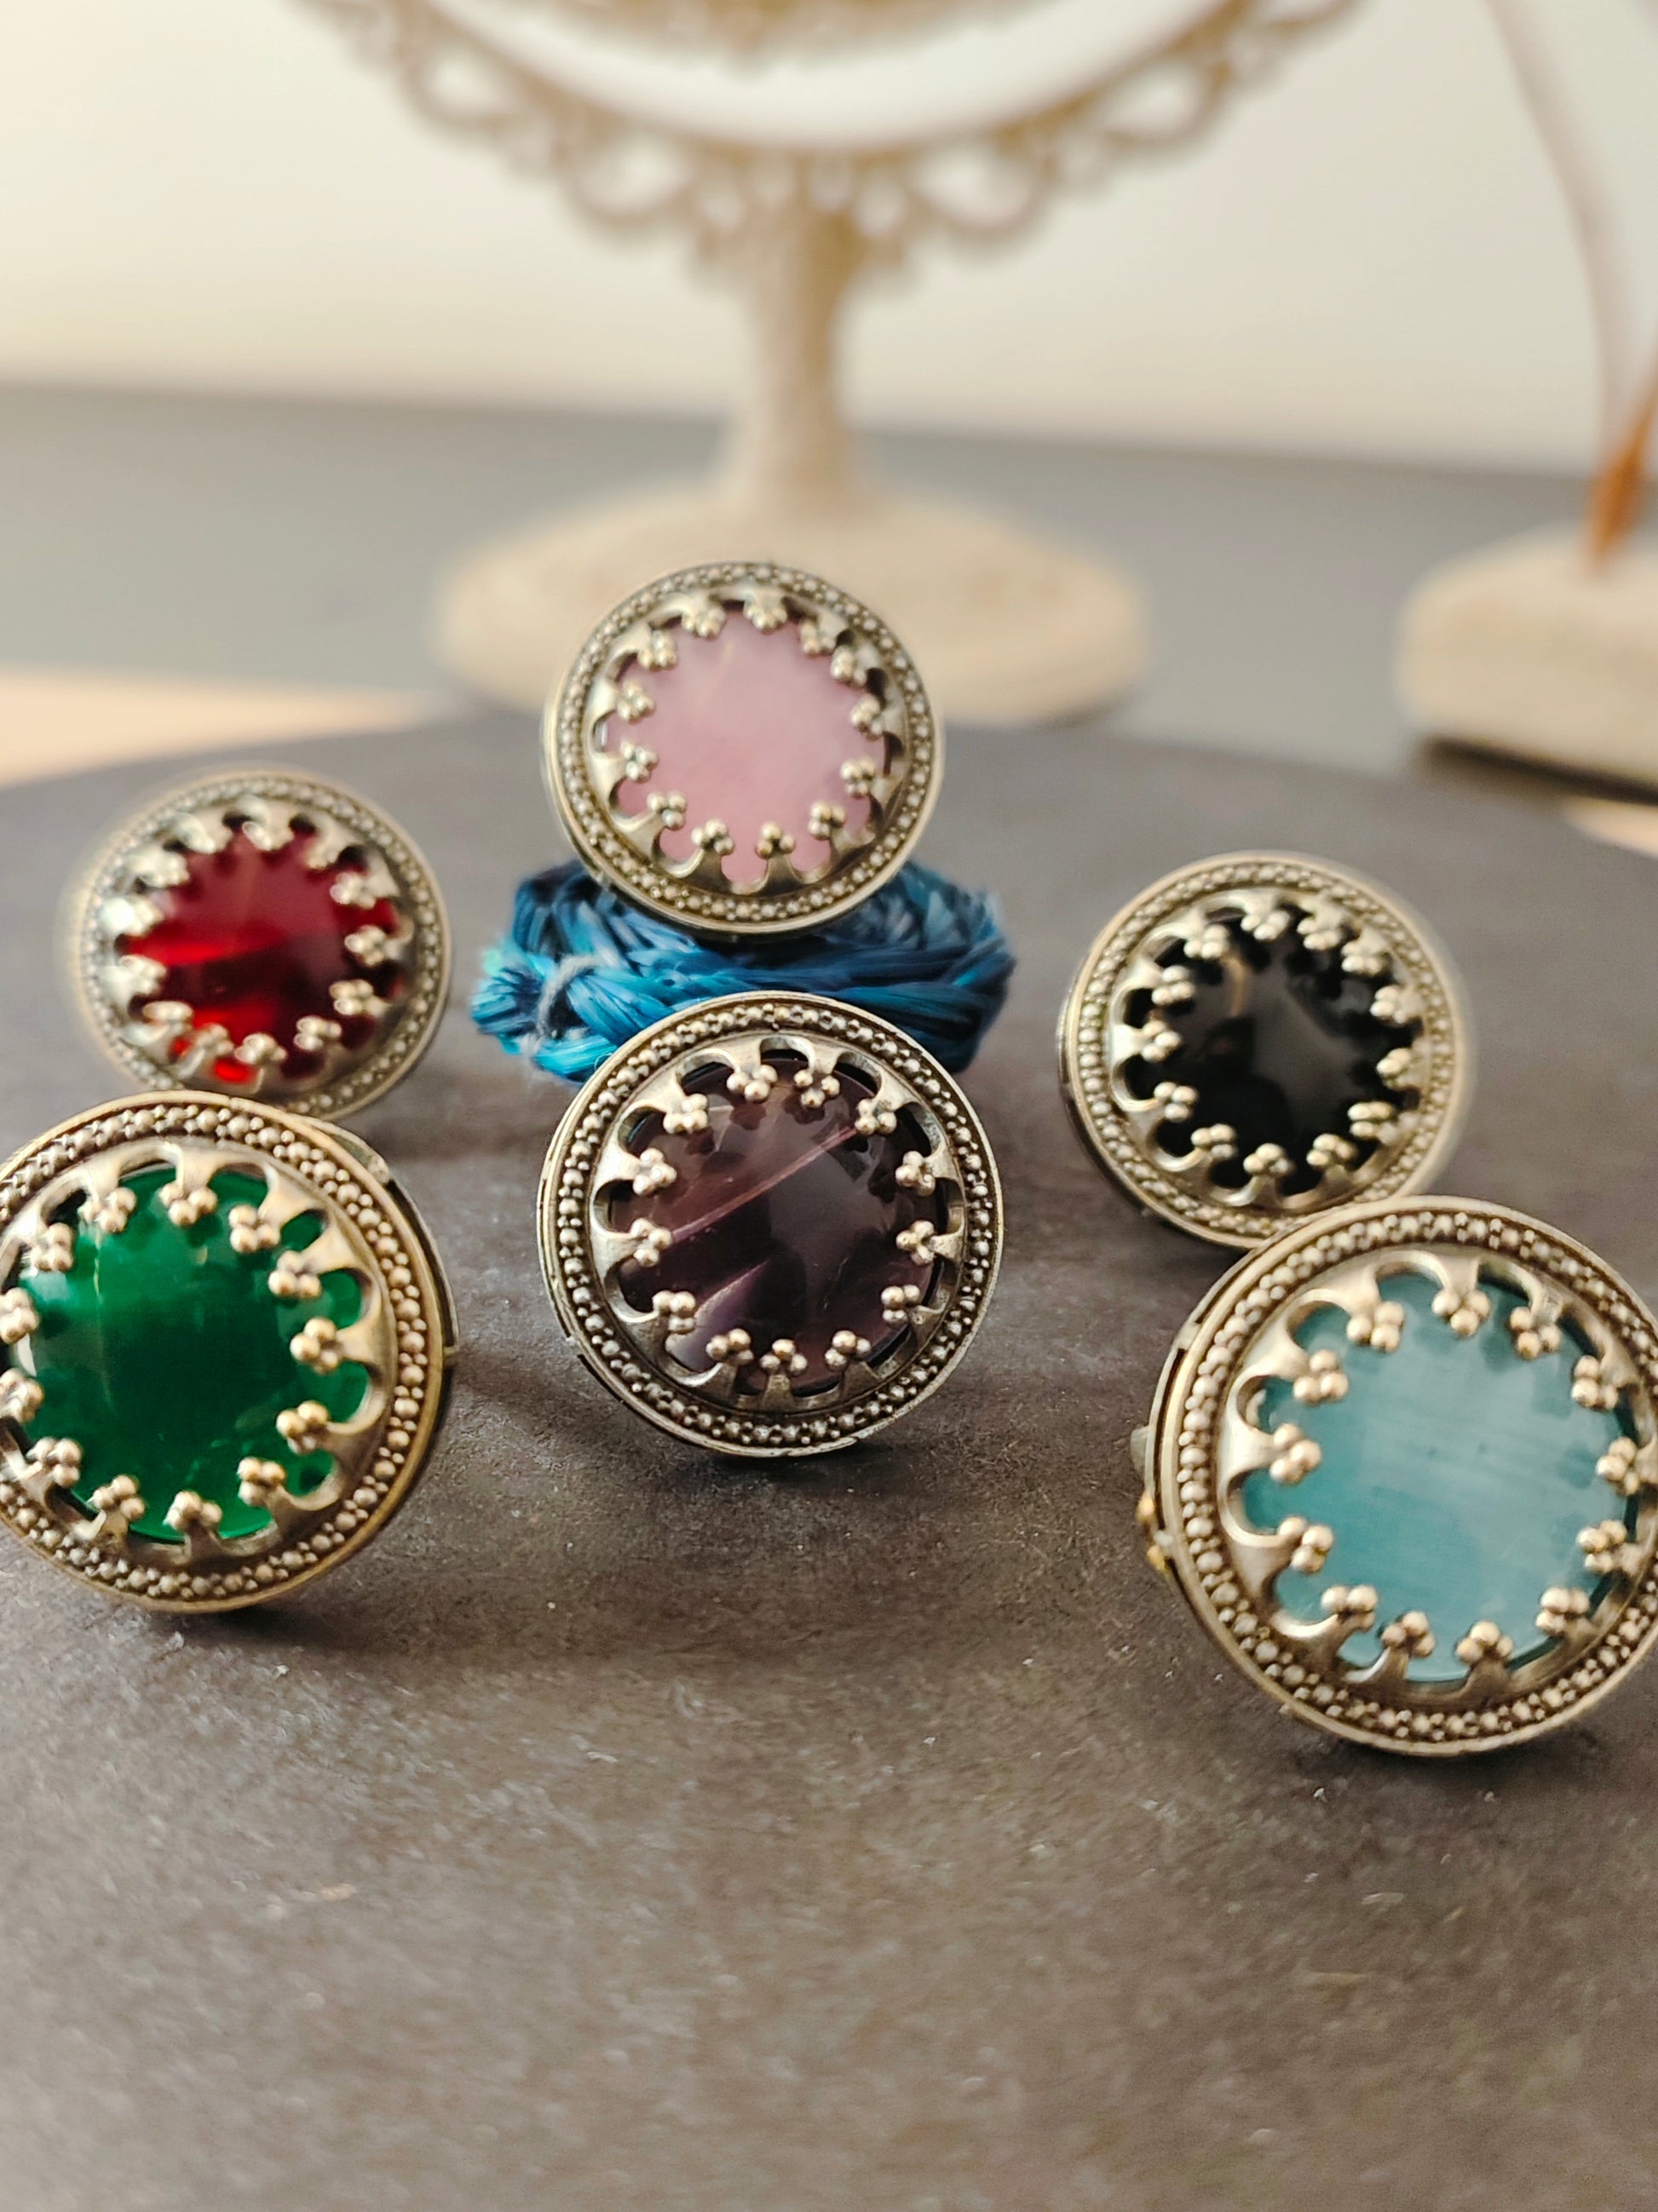 Aganya Multi Color Adjustable Rings with Antique Finish and Big Stone | Festive Occasions | for Traditional Look | for Office Indian Look- Green - Mrigaya India